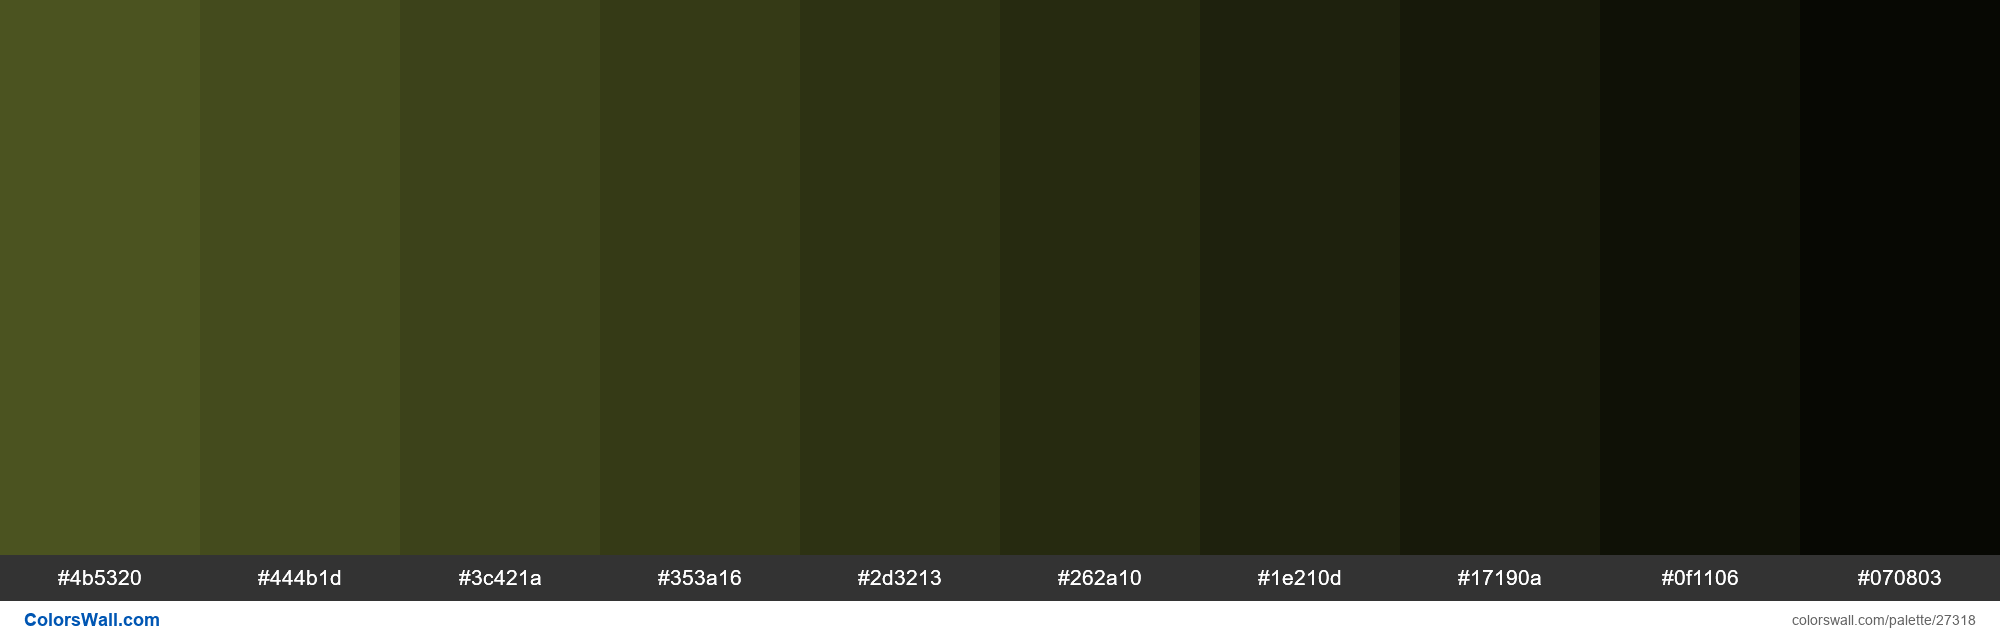 Shades Of Army Green Color 4b5320 Hex 27318 Colorswall 